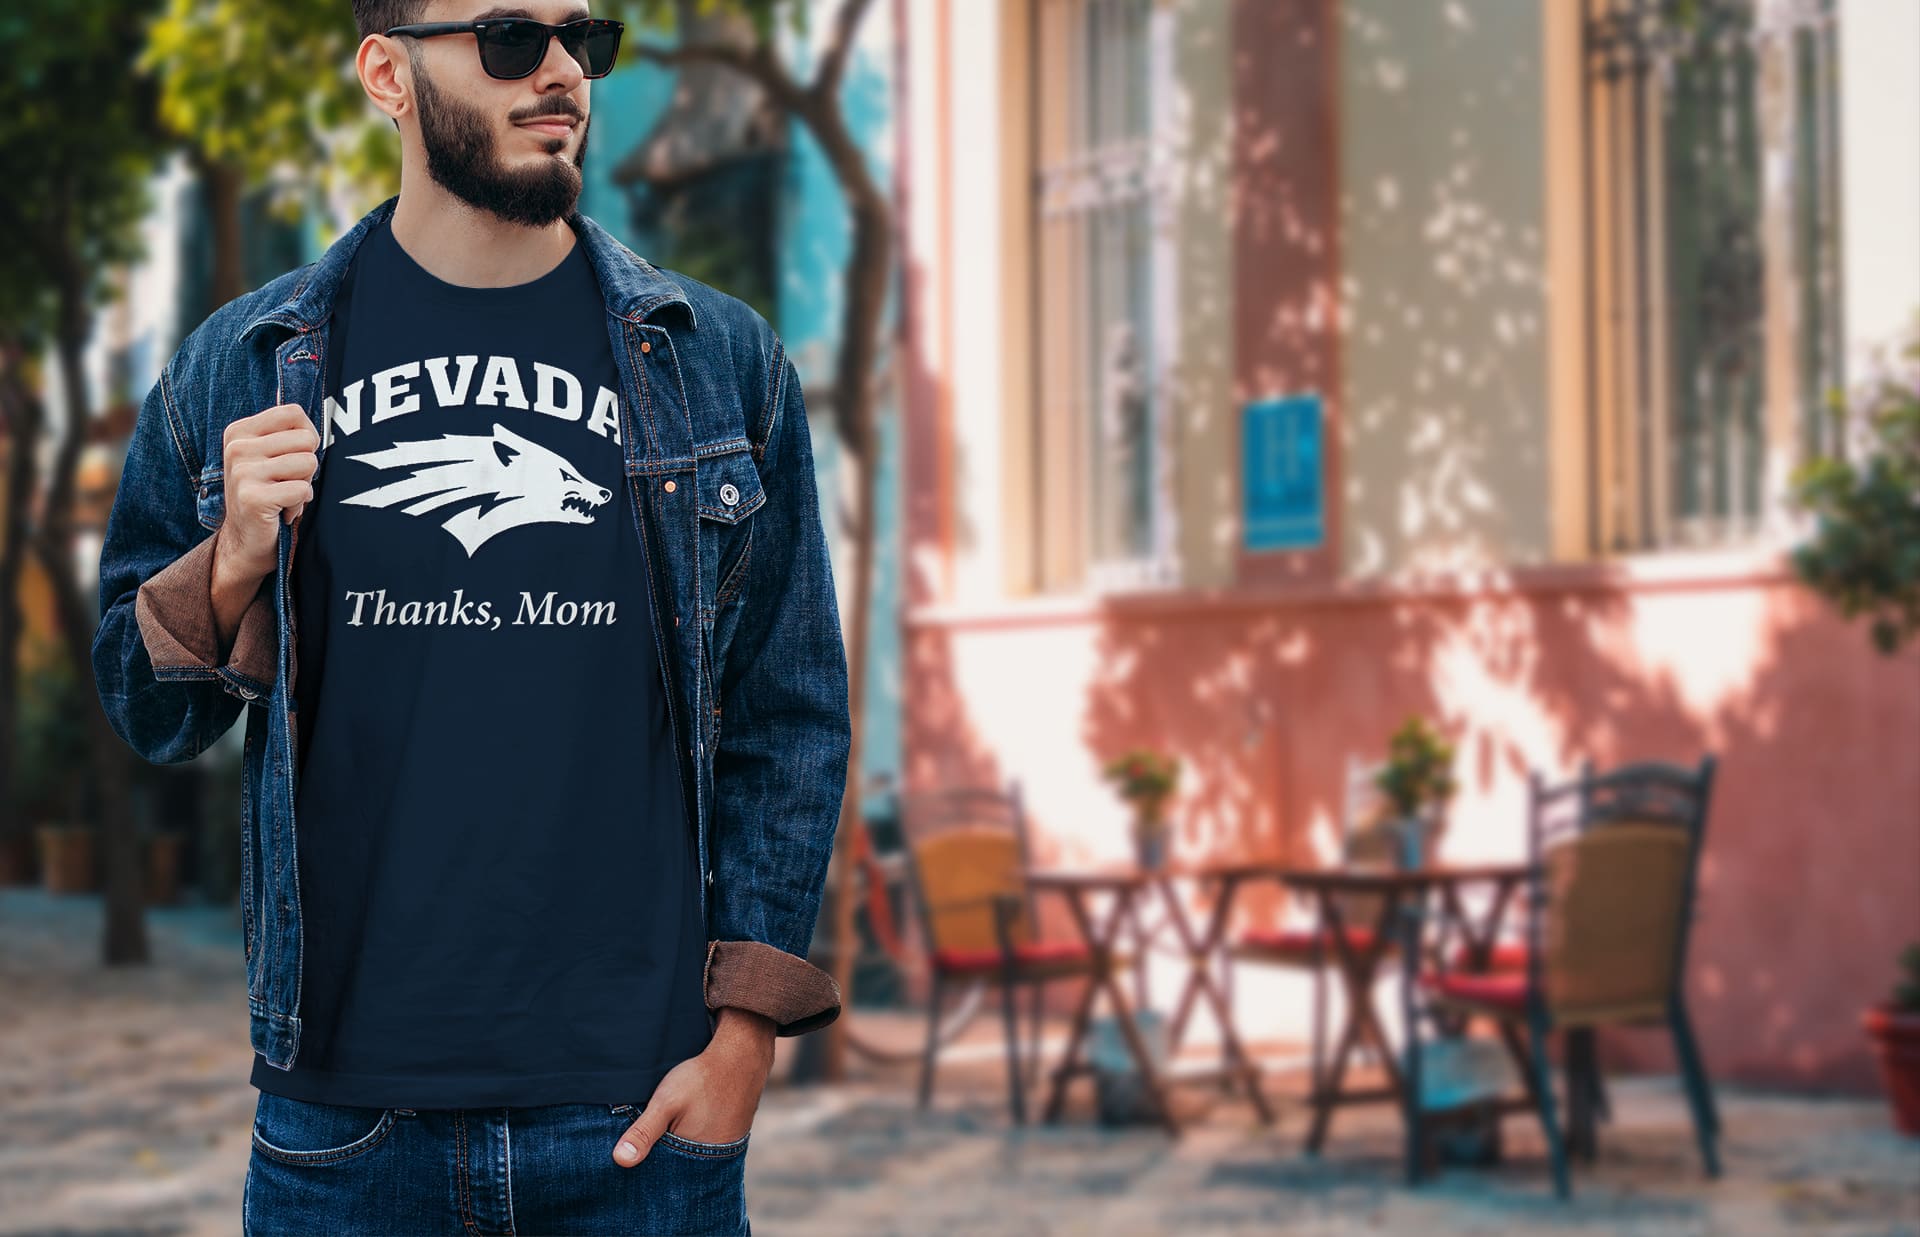 Student wearing a "thanks mom" teeshirt with the Nevada sports logo